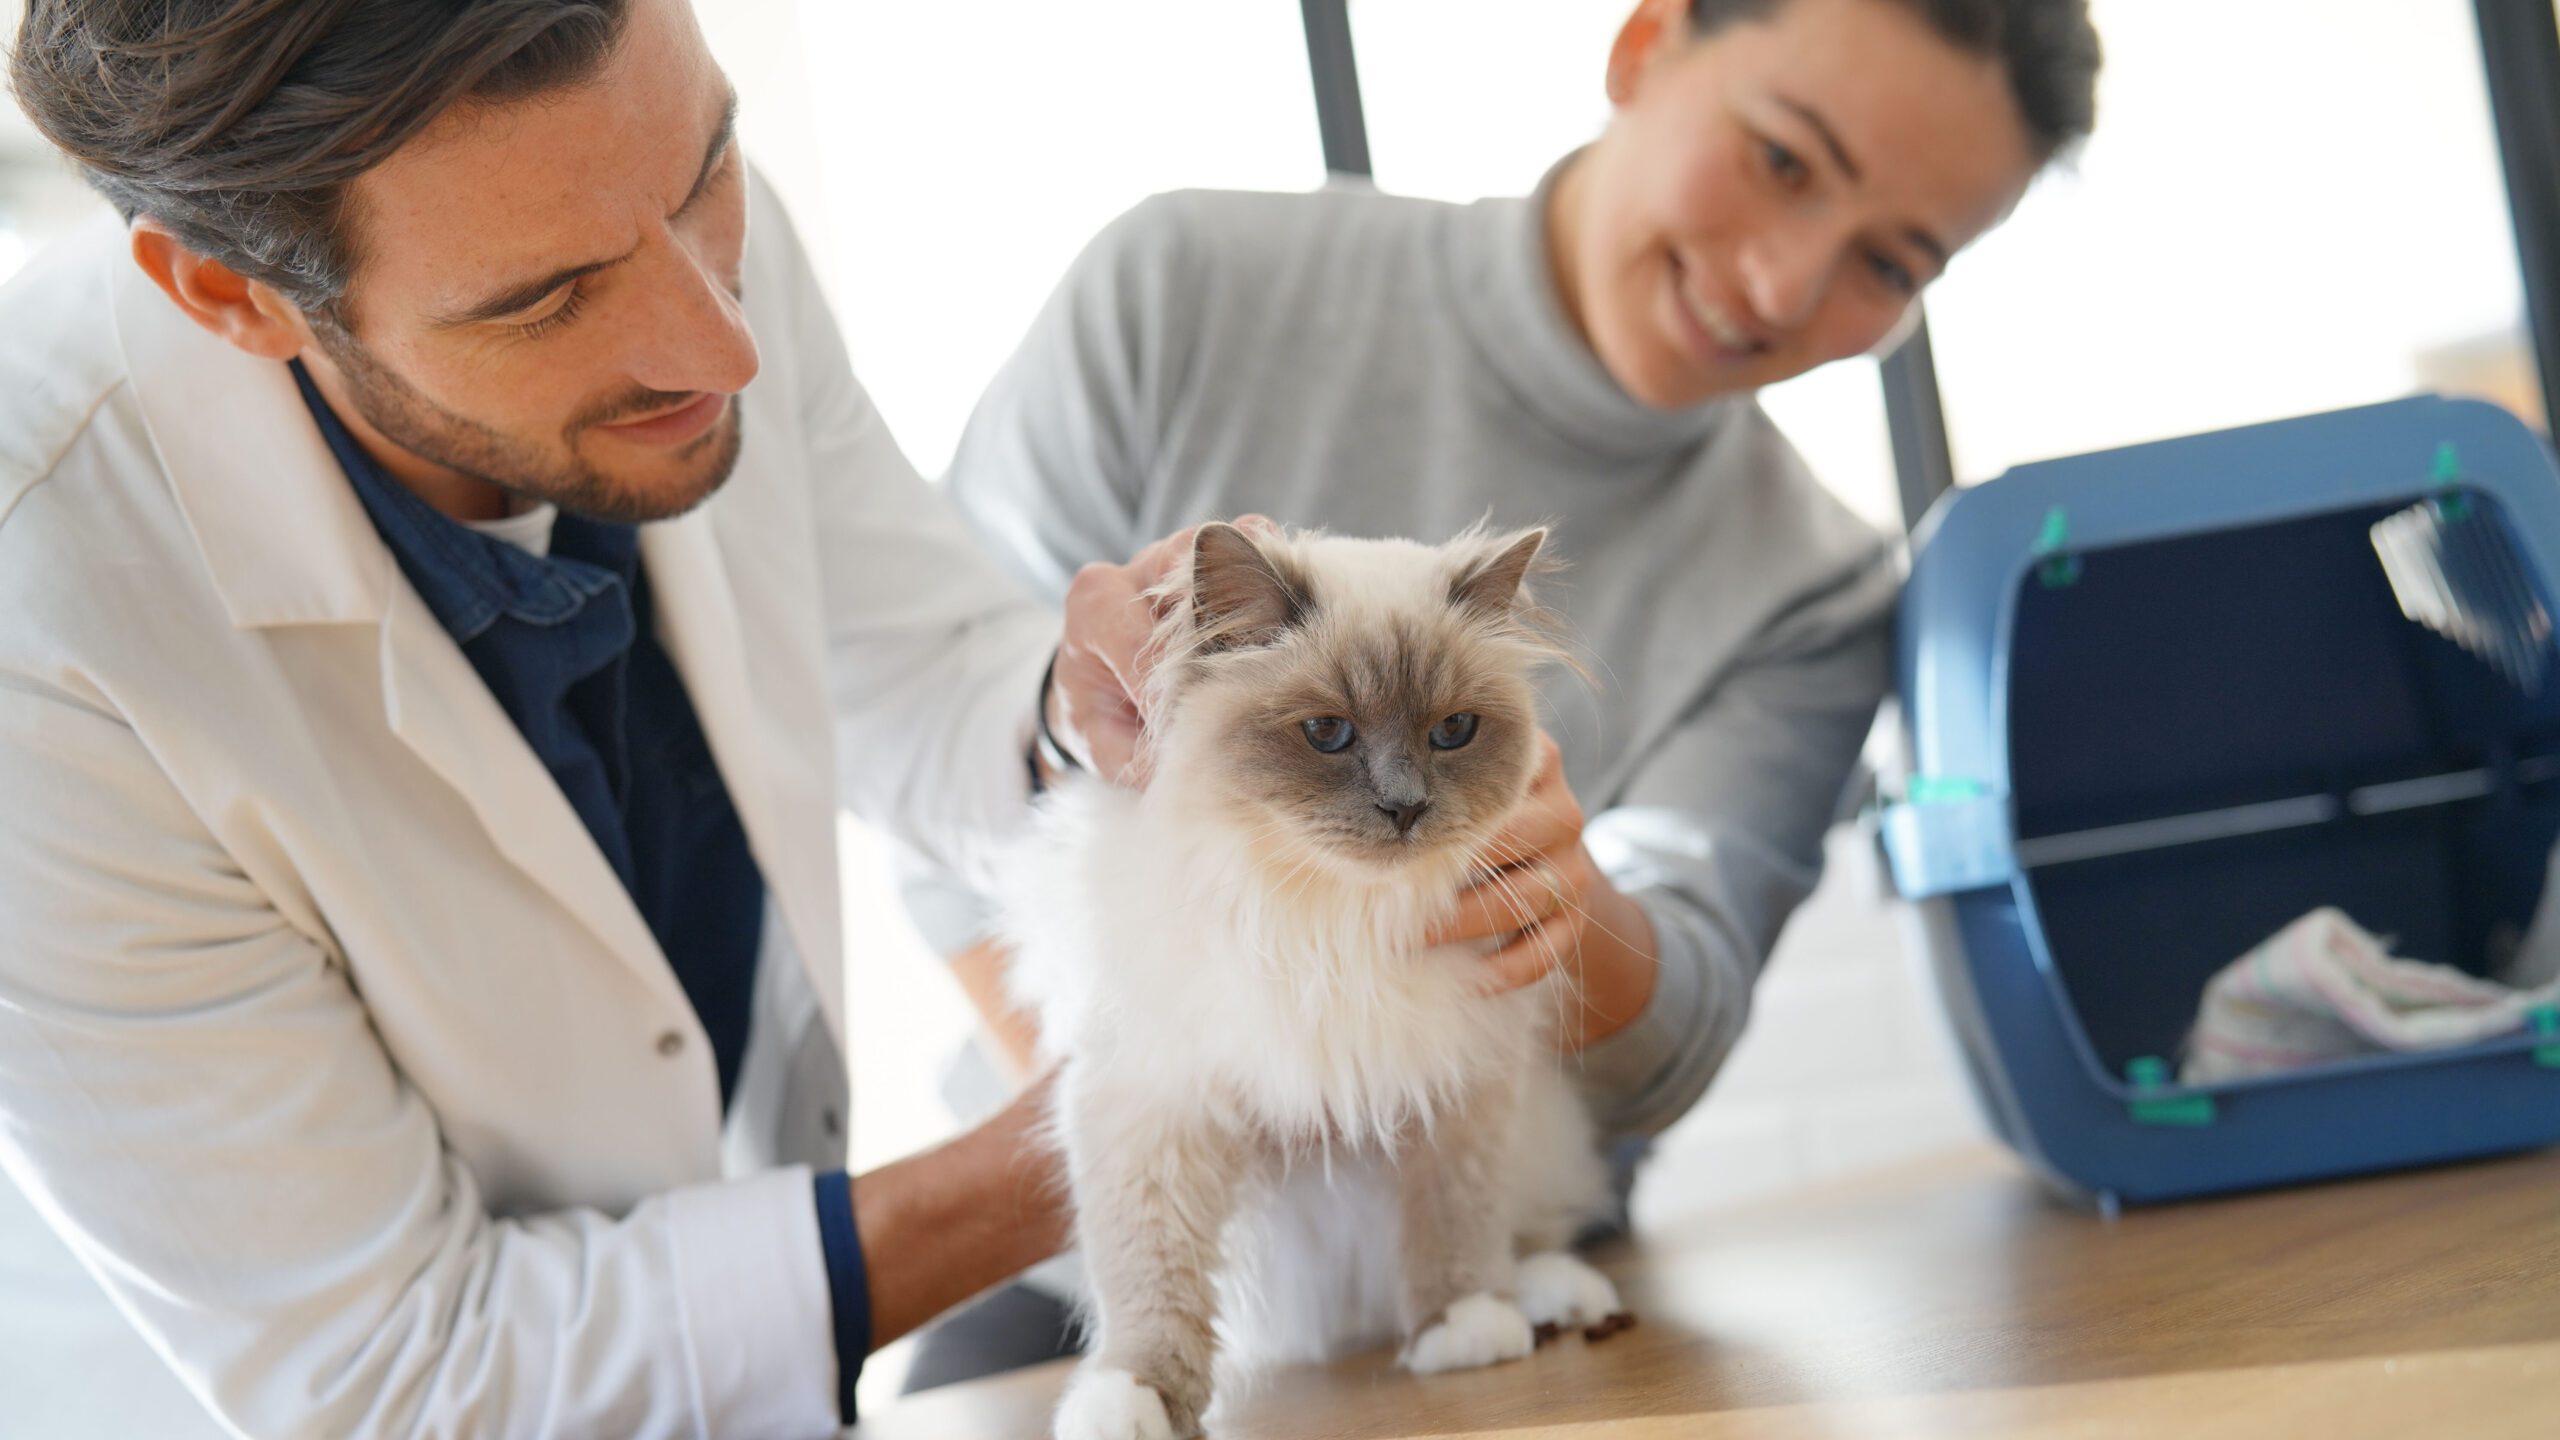 Cat at vet with owner at vet in the background. Vet wellness plans help make it easy for owners to bring their pets in for regular checkups without worrying about the overwhelming costs.